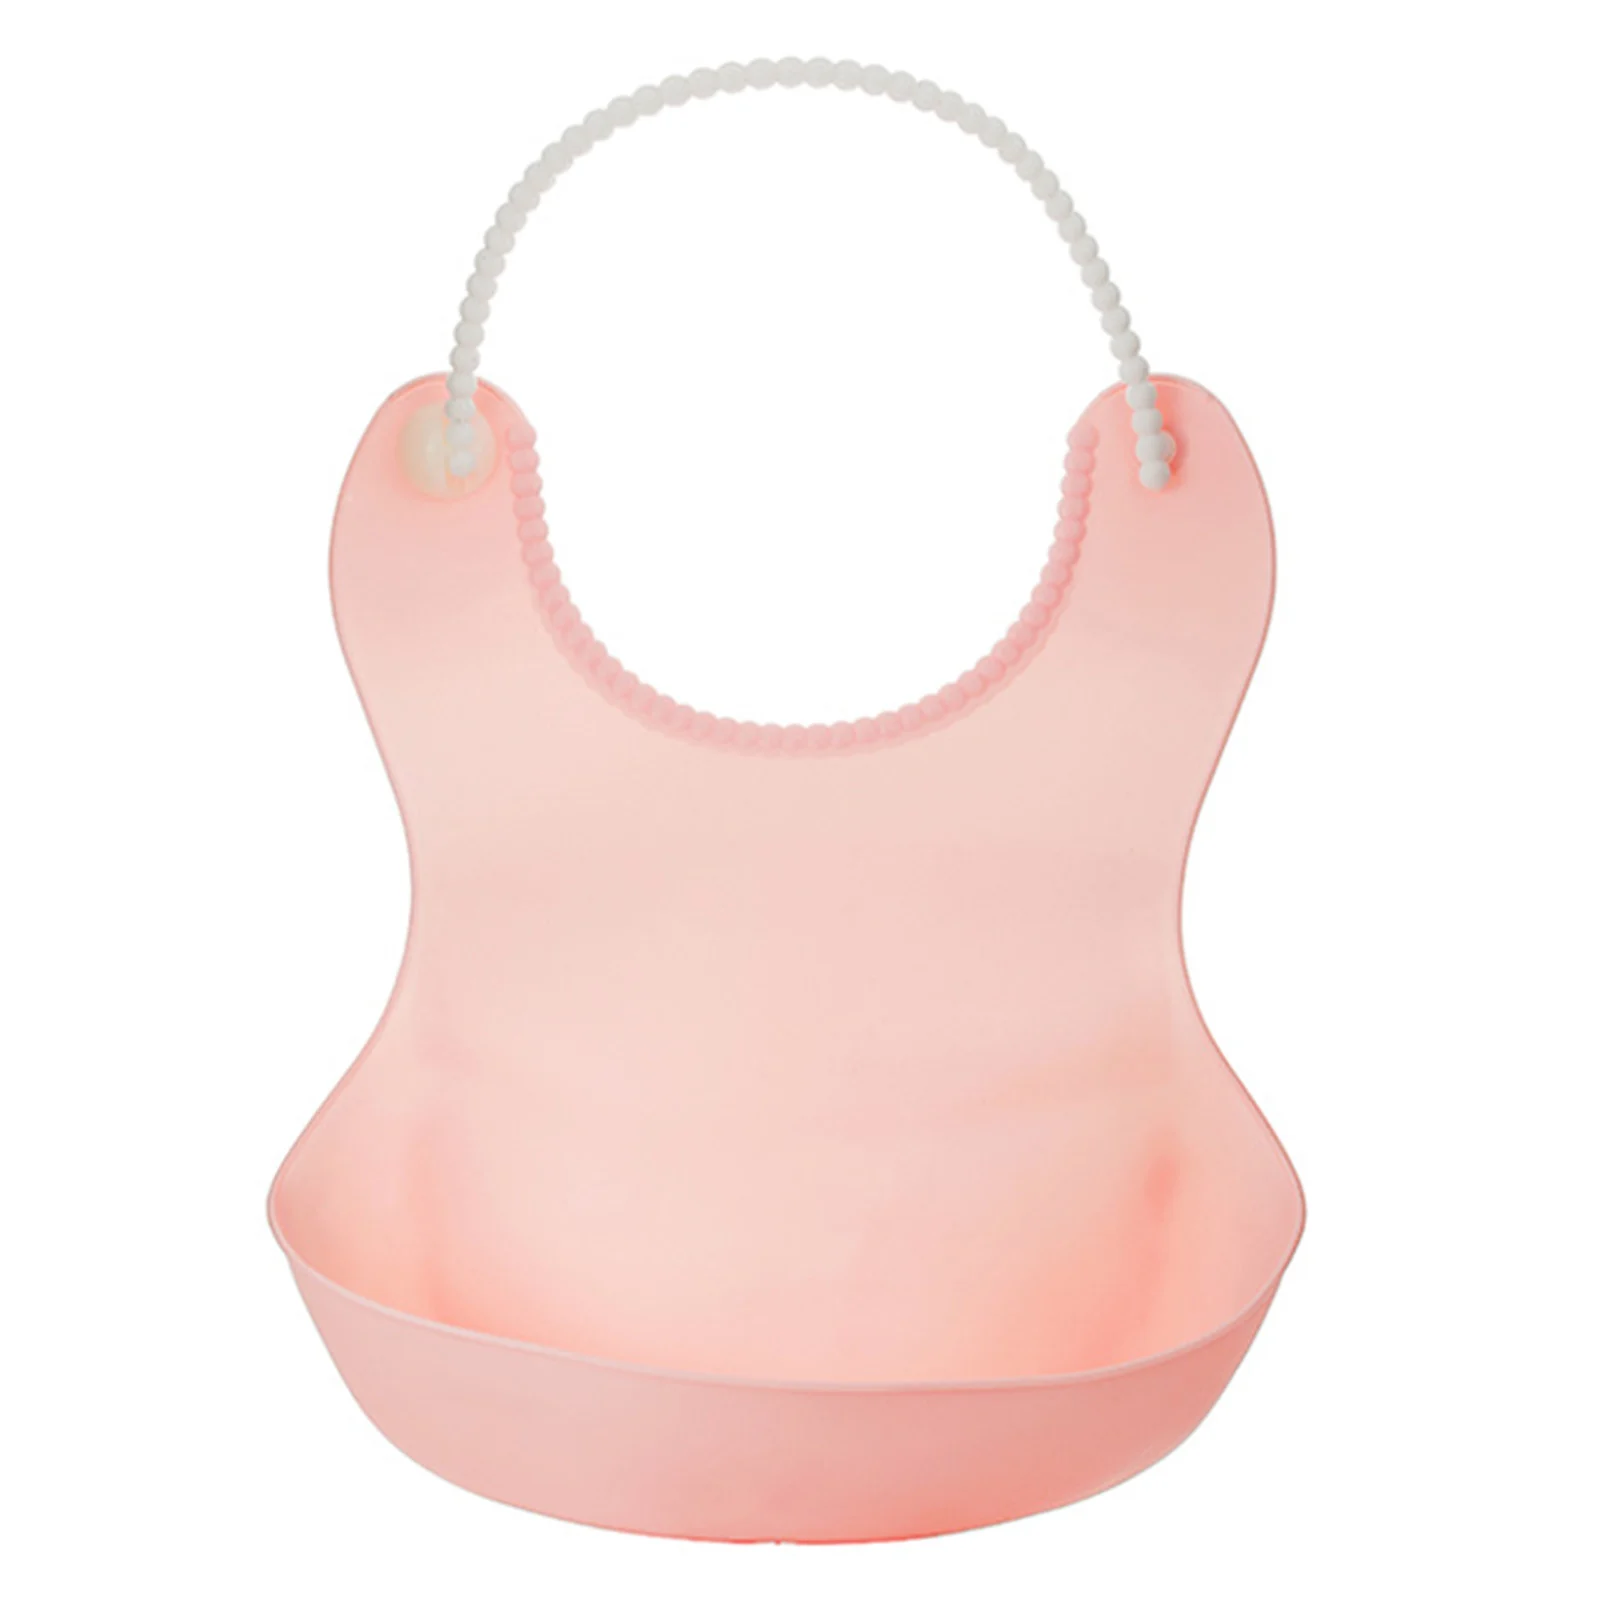 

Newborn Cute Convenient Durable Practical Stylish Solid Color Leak-Proof Silicone Drinking Eating Bib Feeding Apron